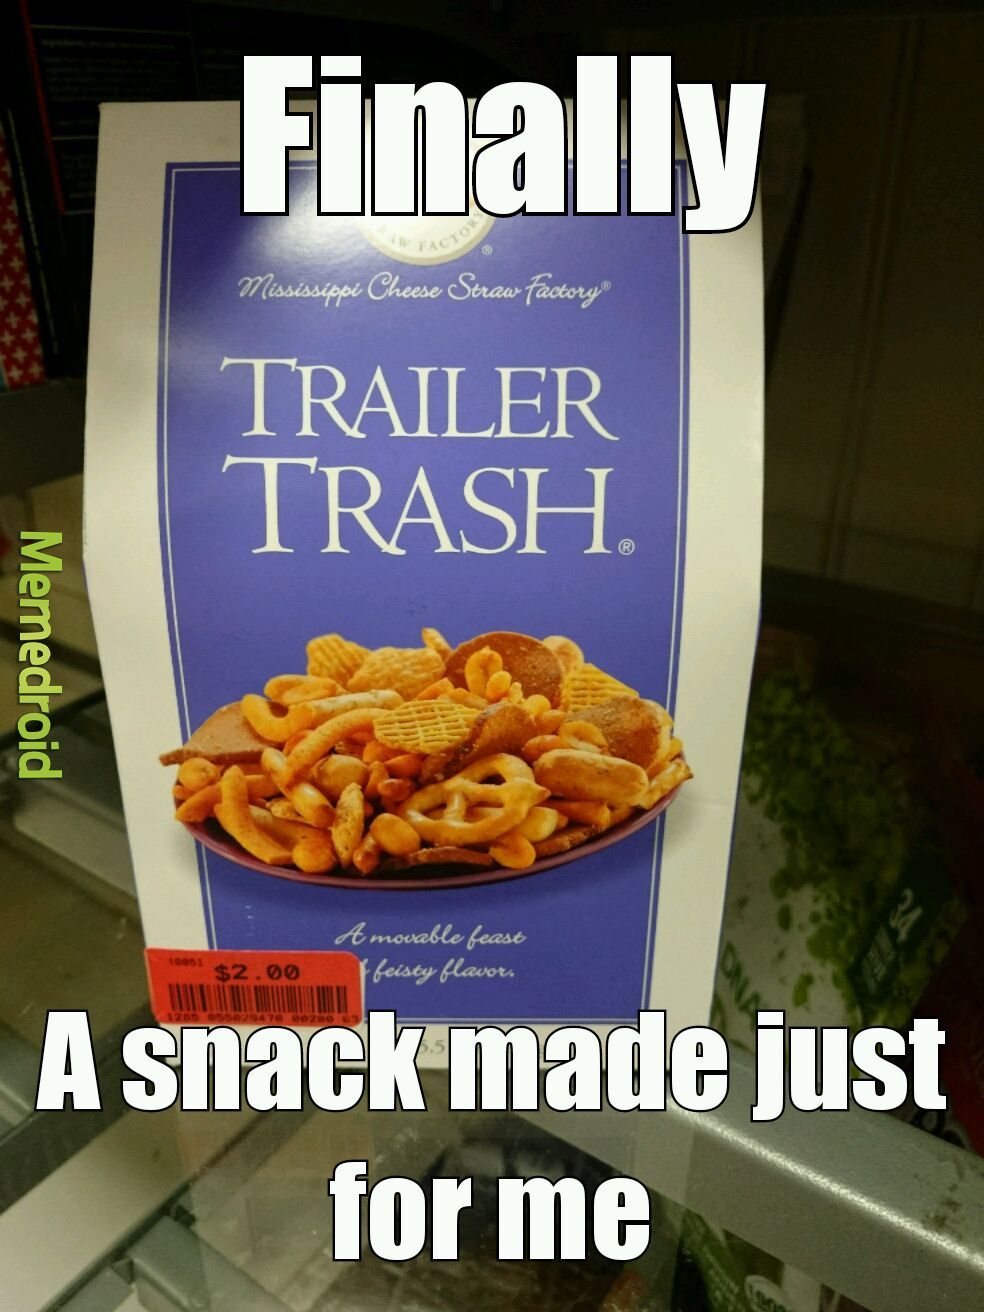 Also a snack for all walmart shoppers - meme